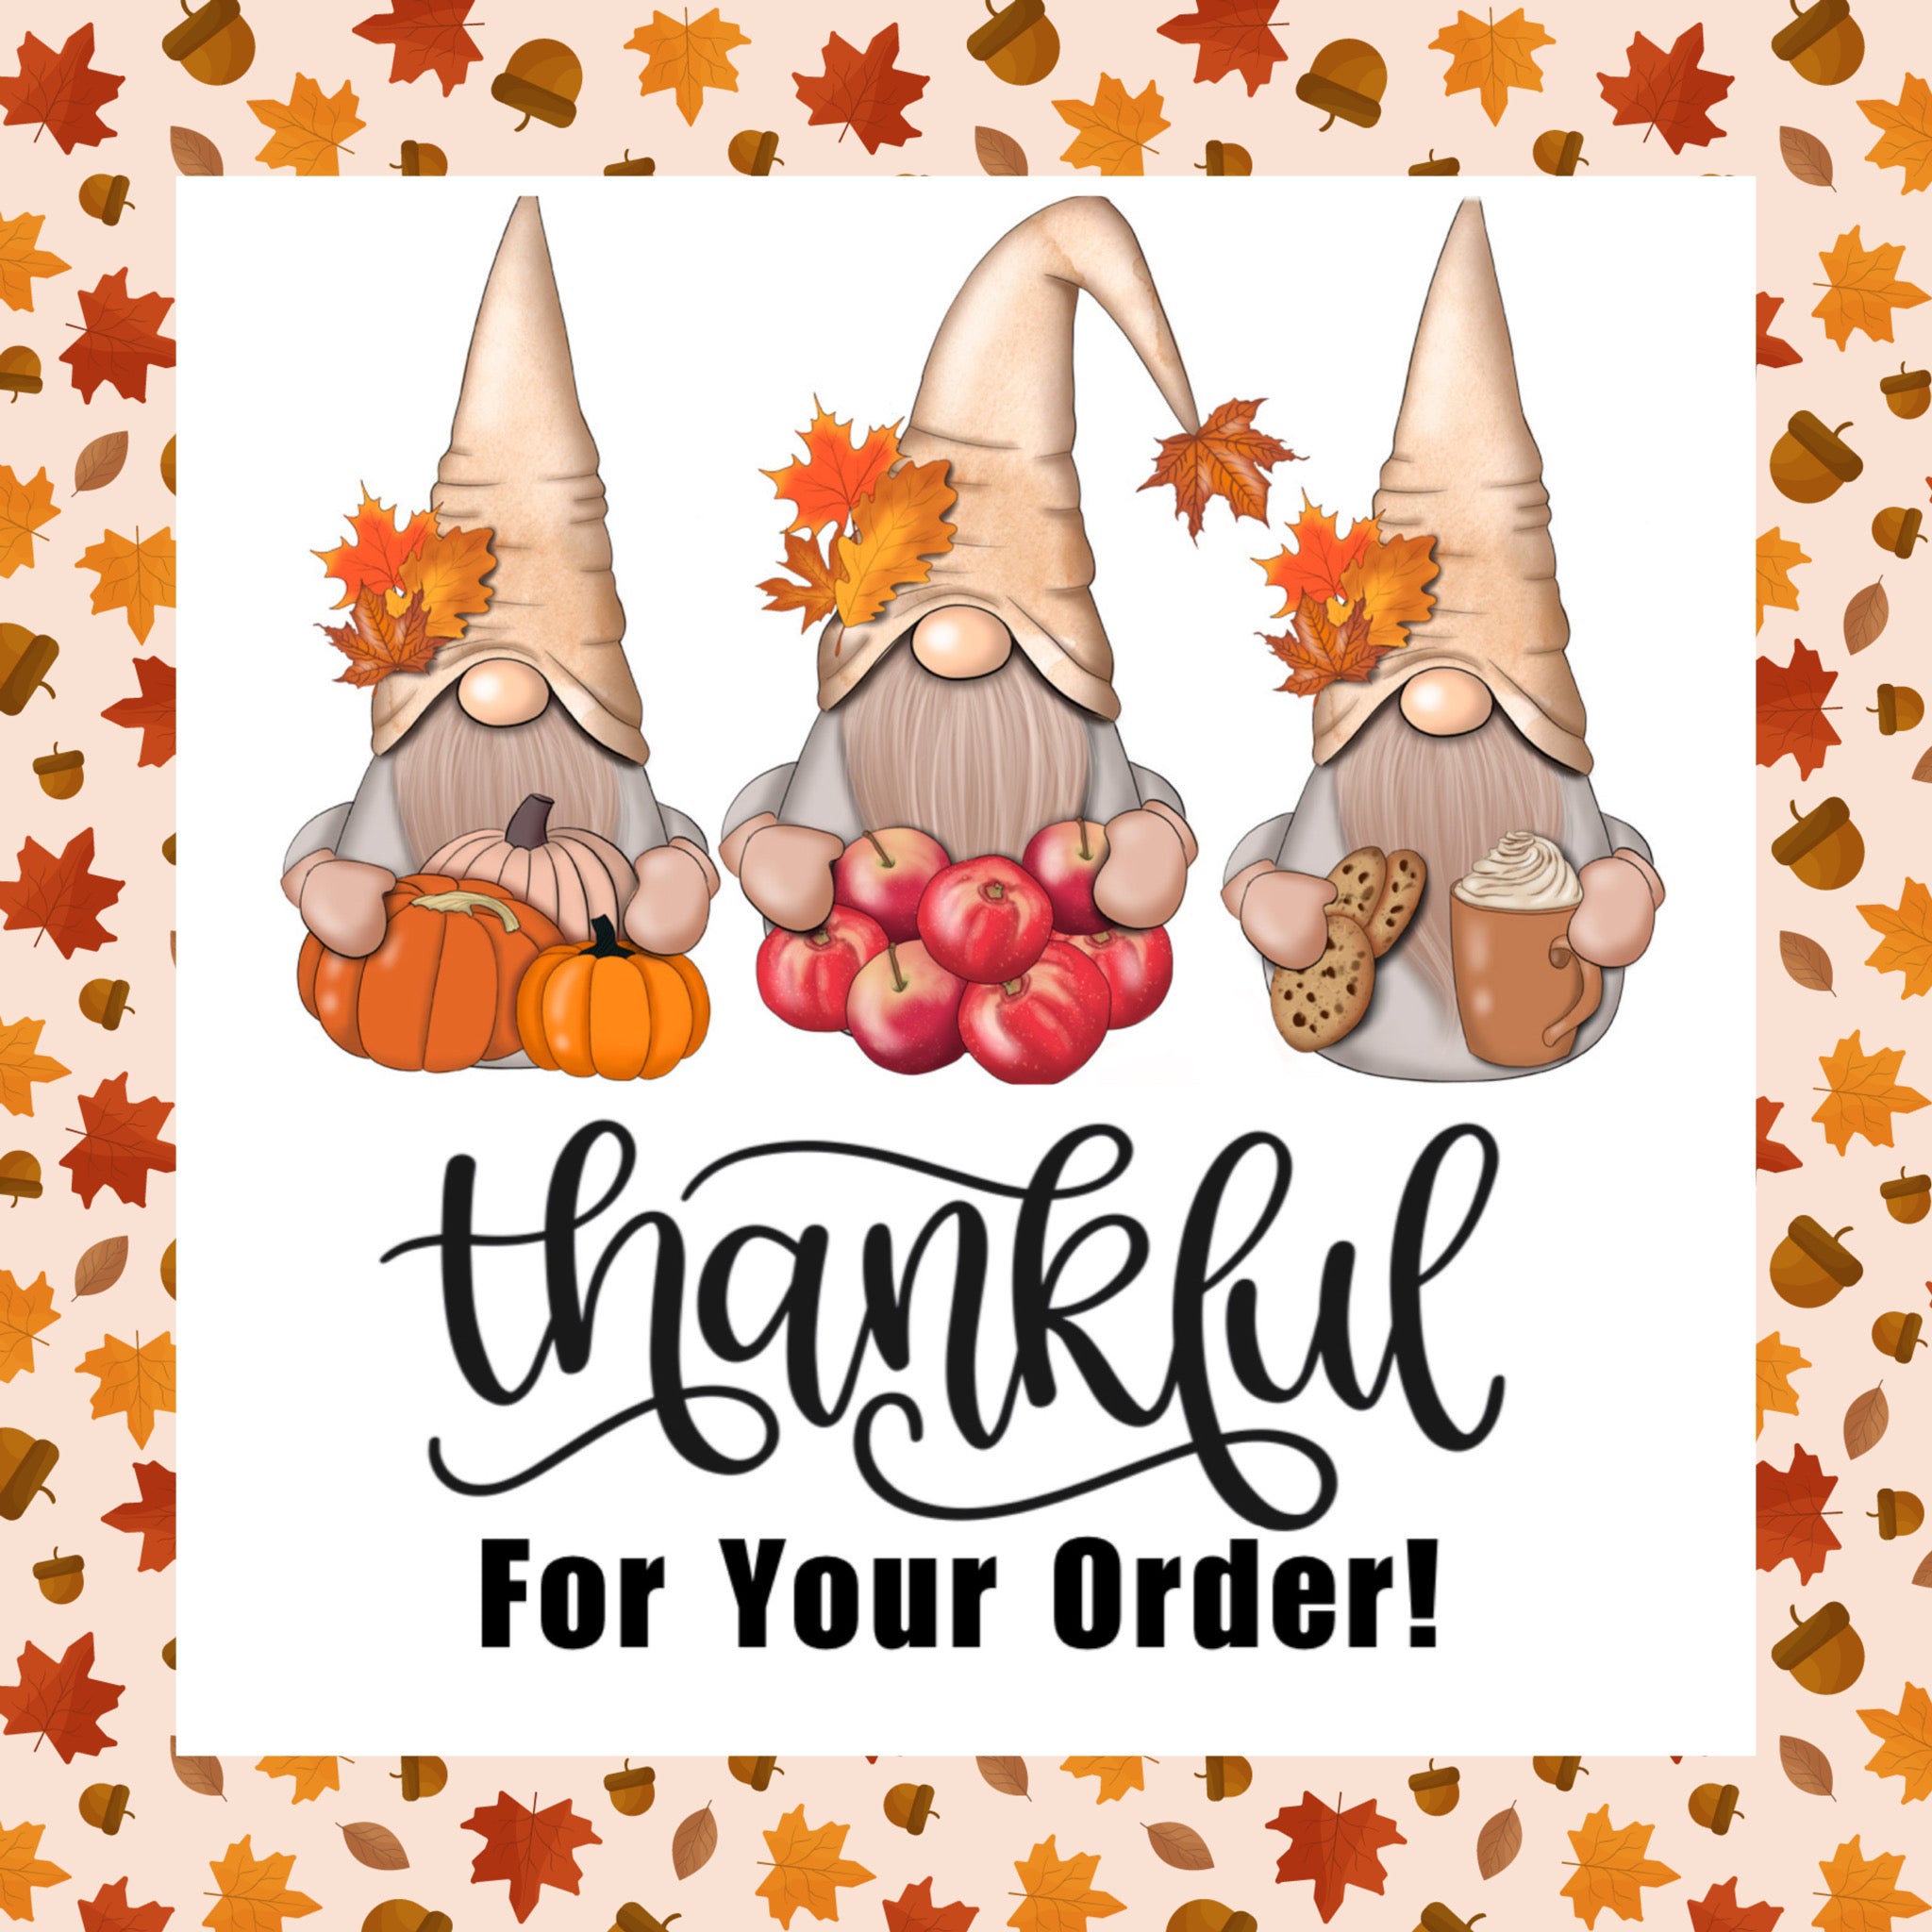 TGD Exclusive! Thankful for your Order, Fall Gnomes 2x2 Square Stickers, 25 stickers per pack